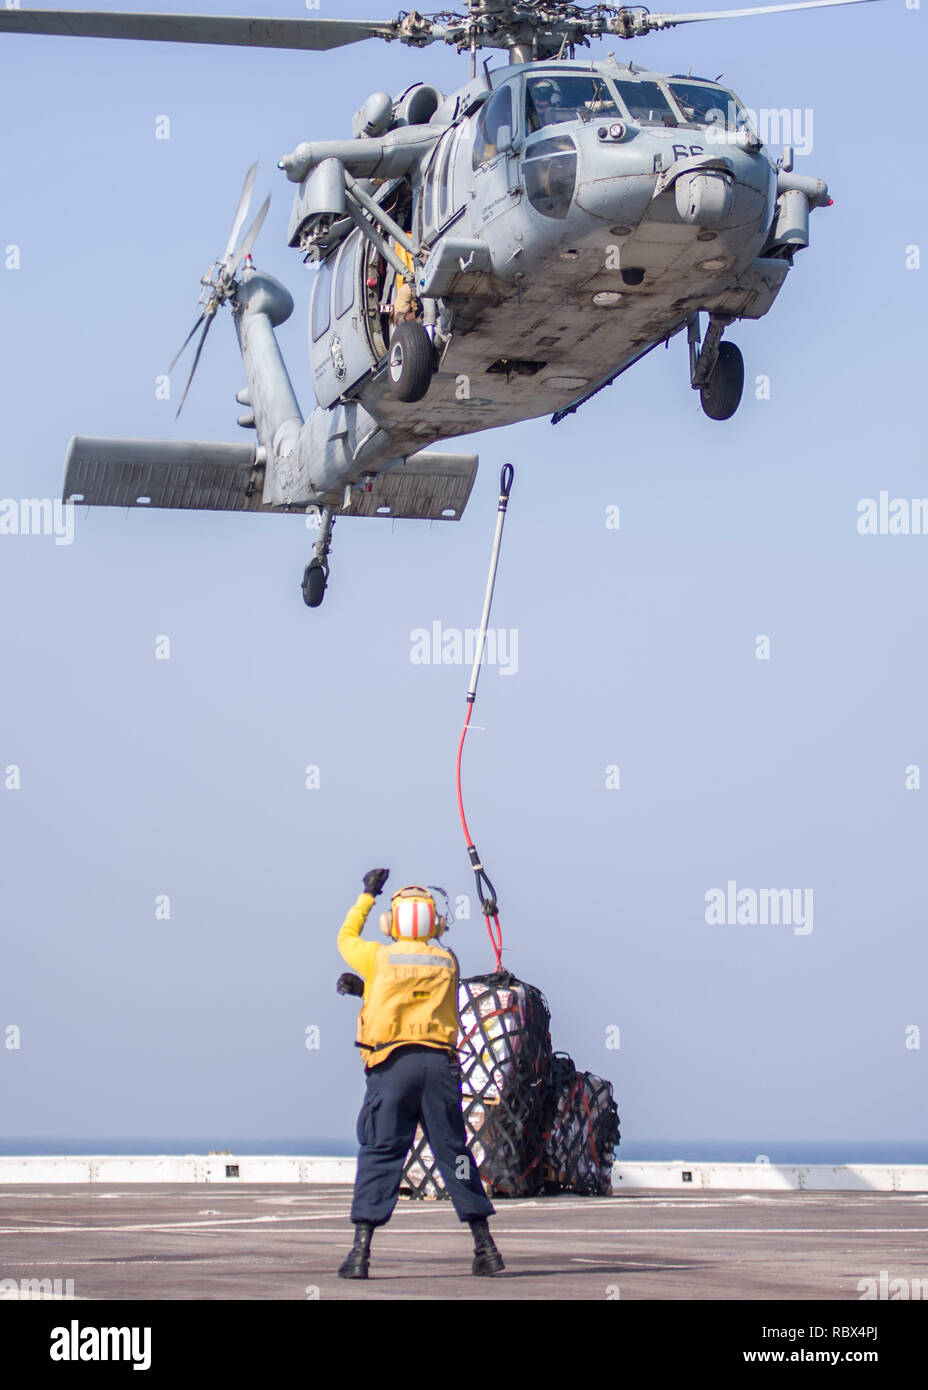 190107-N-PH222-1349 ARABIAN SEA (Jan. 7, 2018) Aviation Boatswain’s Mate (Handling) 2nd Class Brittany Brown, from Fort Lauderdale, Fla., assigned to the San Antonio-class amphibious transport dock ship USS Anchorage (LPD 23), signals a MH-60S Sea Hawk helicopter, attached to the “Blackjacks” of Helicopter Sea Combat Squadron (HSC) 21, during a vertical replenishment while on a deployment of the Essex Amphibious Ready Group (ARG) and 13th Marine Expeditionary Unit (MEU). The Essex ARG/13th MEU is flexible and persistent Navy-Marine Corps team deployed to the U.S. 5th Fleet area of operations i Stock Photo